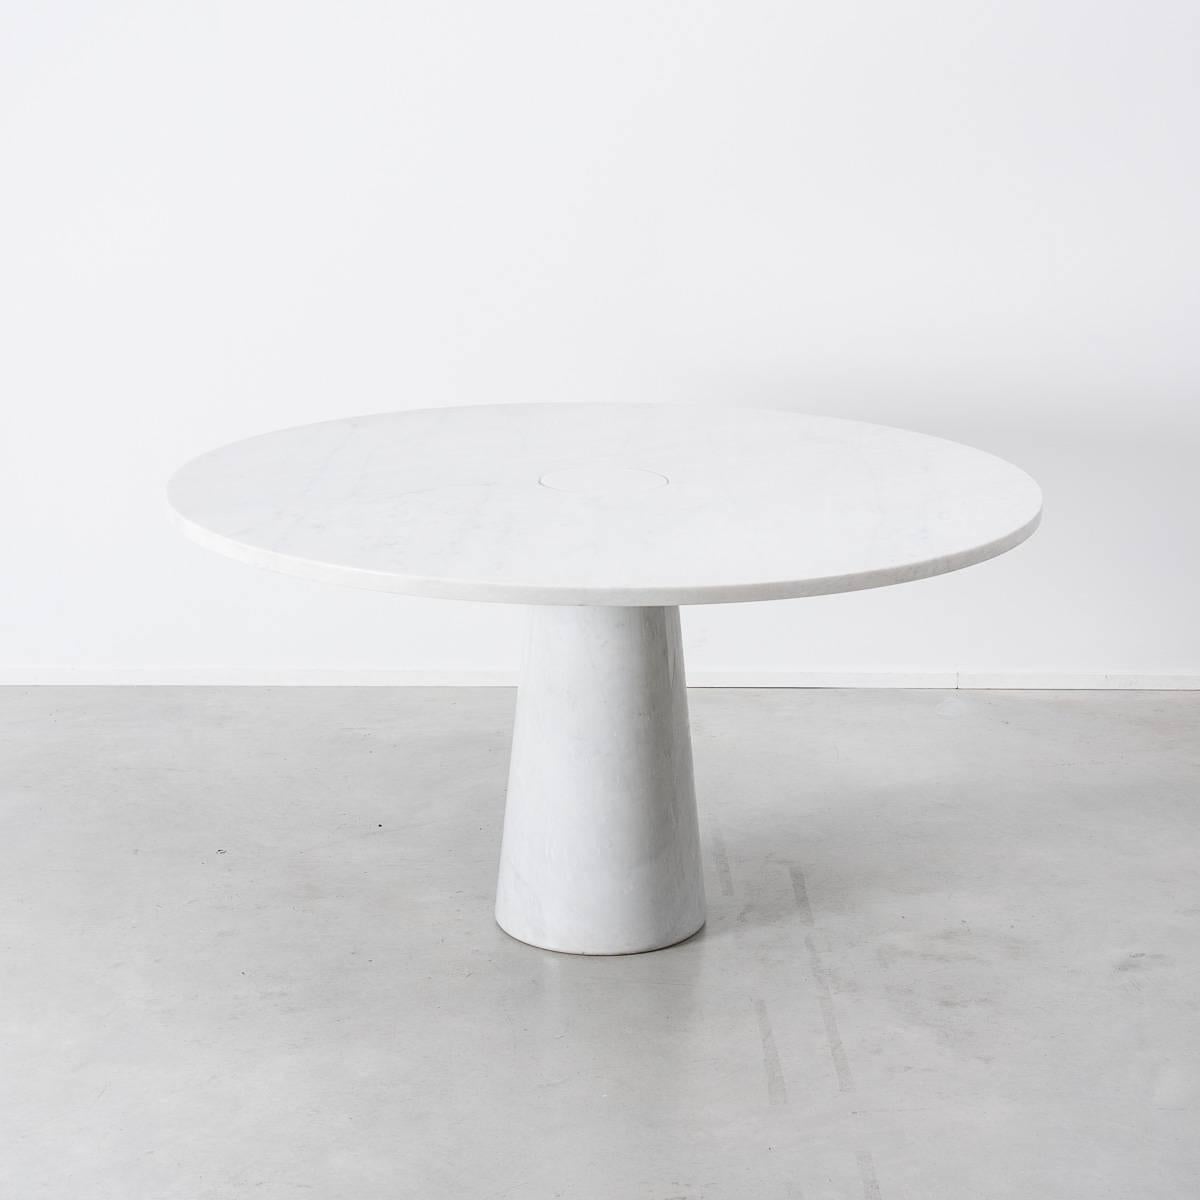 The Eros table’s clean and elegant form is based around Angelo Mangiarotti’s desire to create an impressive table using substantial materials without any joints. Designed in 1970 for Skipper, it is made solely from Carrara marble, in an interlocking